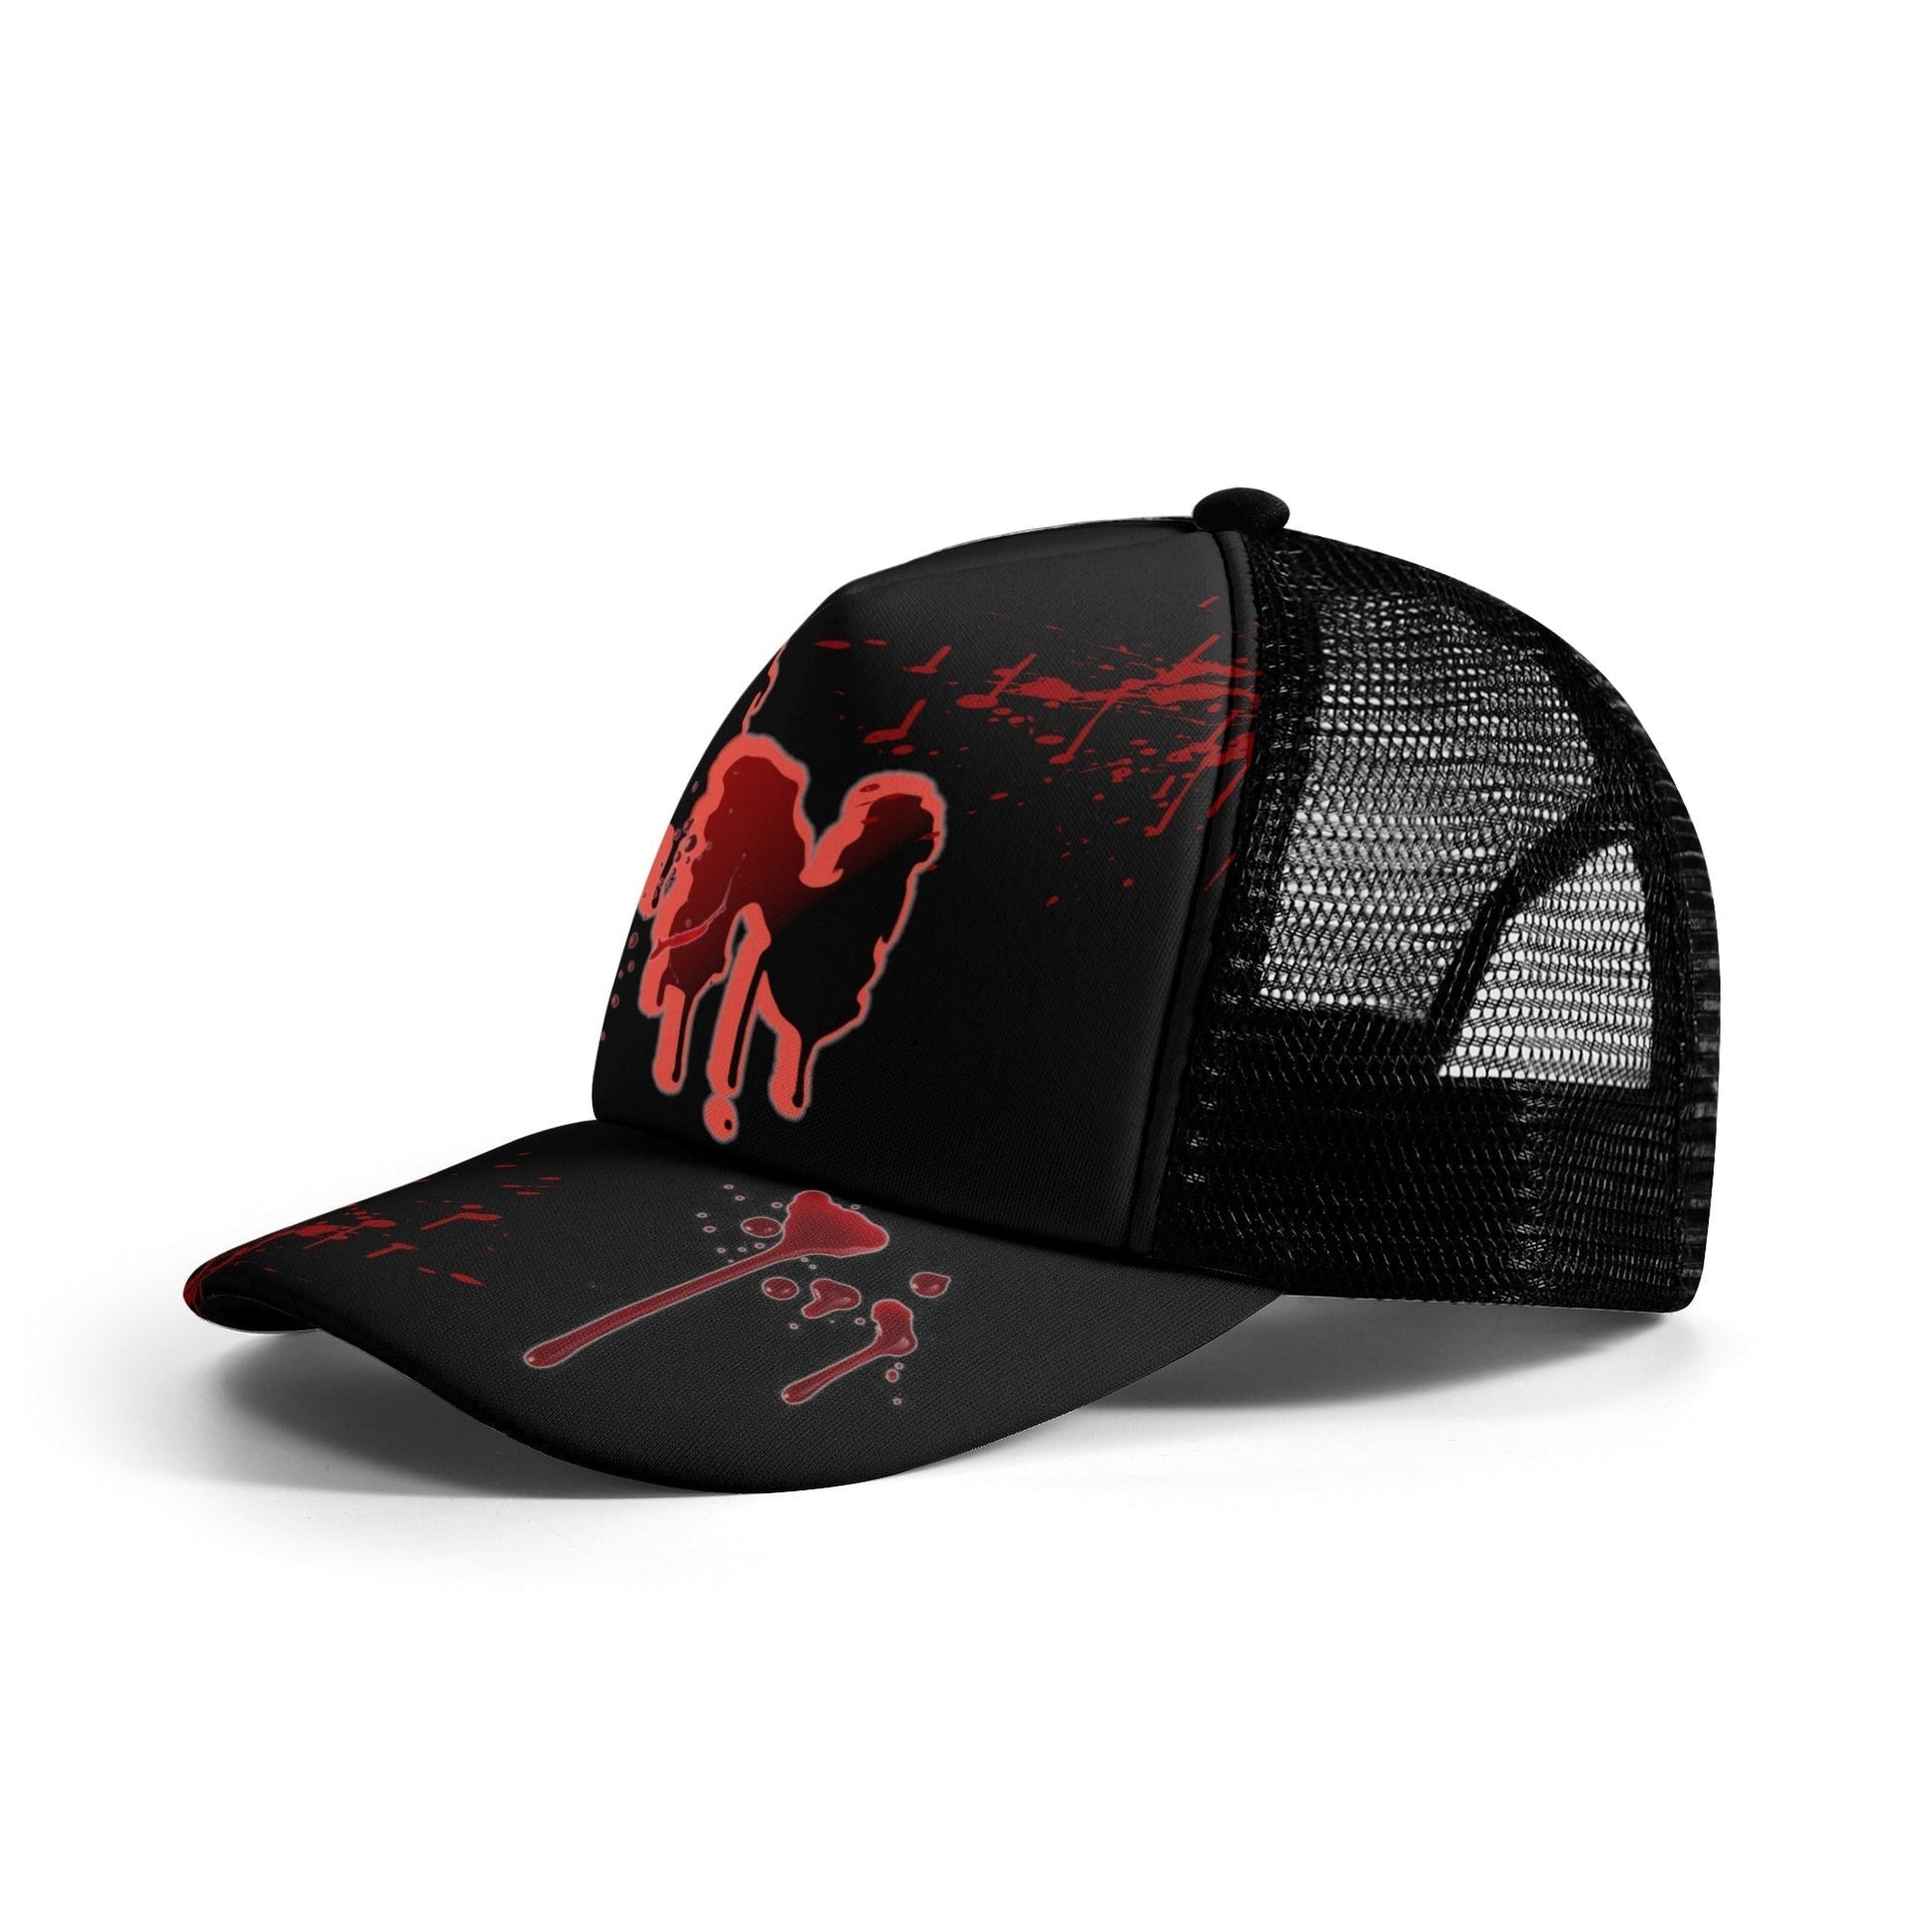 Stand out  with the  My Bloody Nuggieween Kids Mesh Baseball Caps  available at Hey Nugget. Grab yours today!